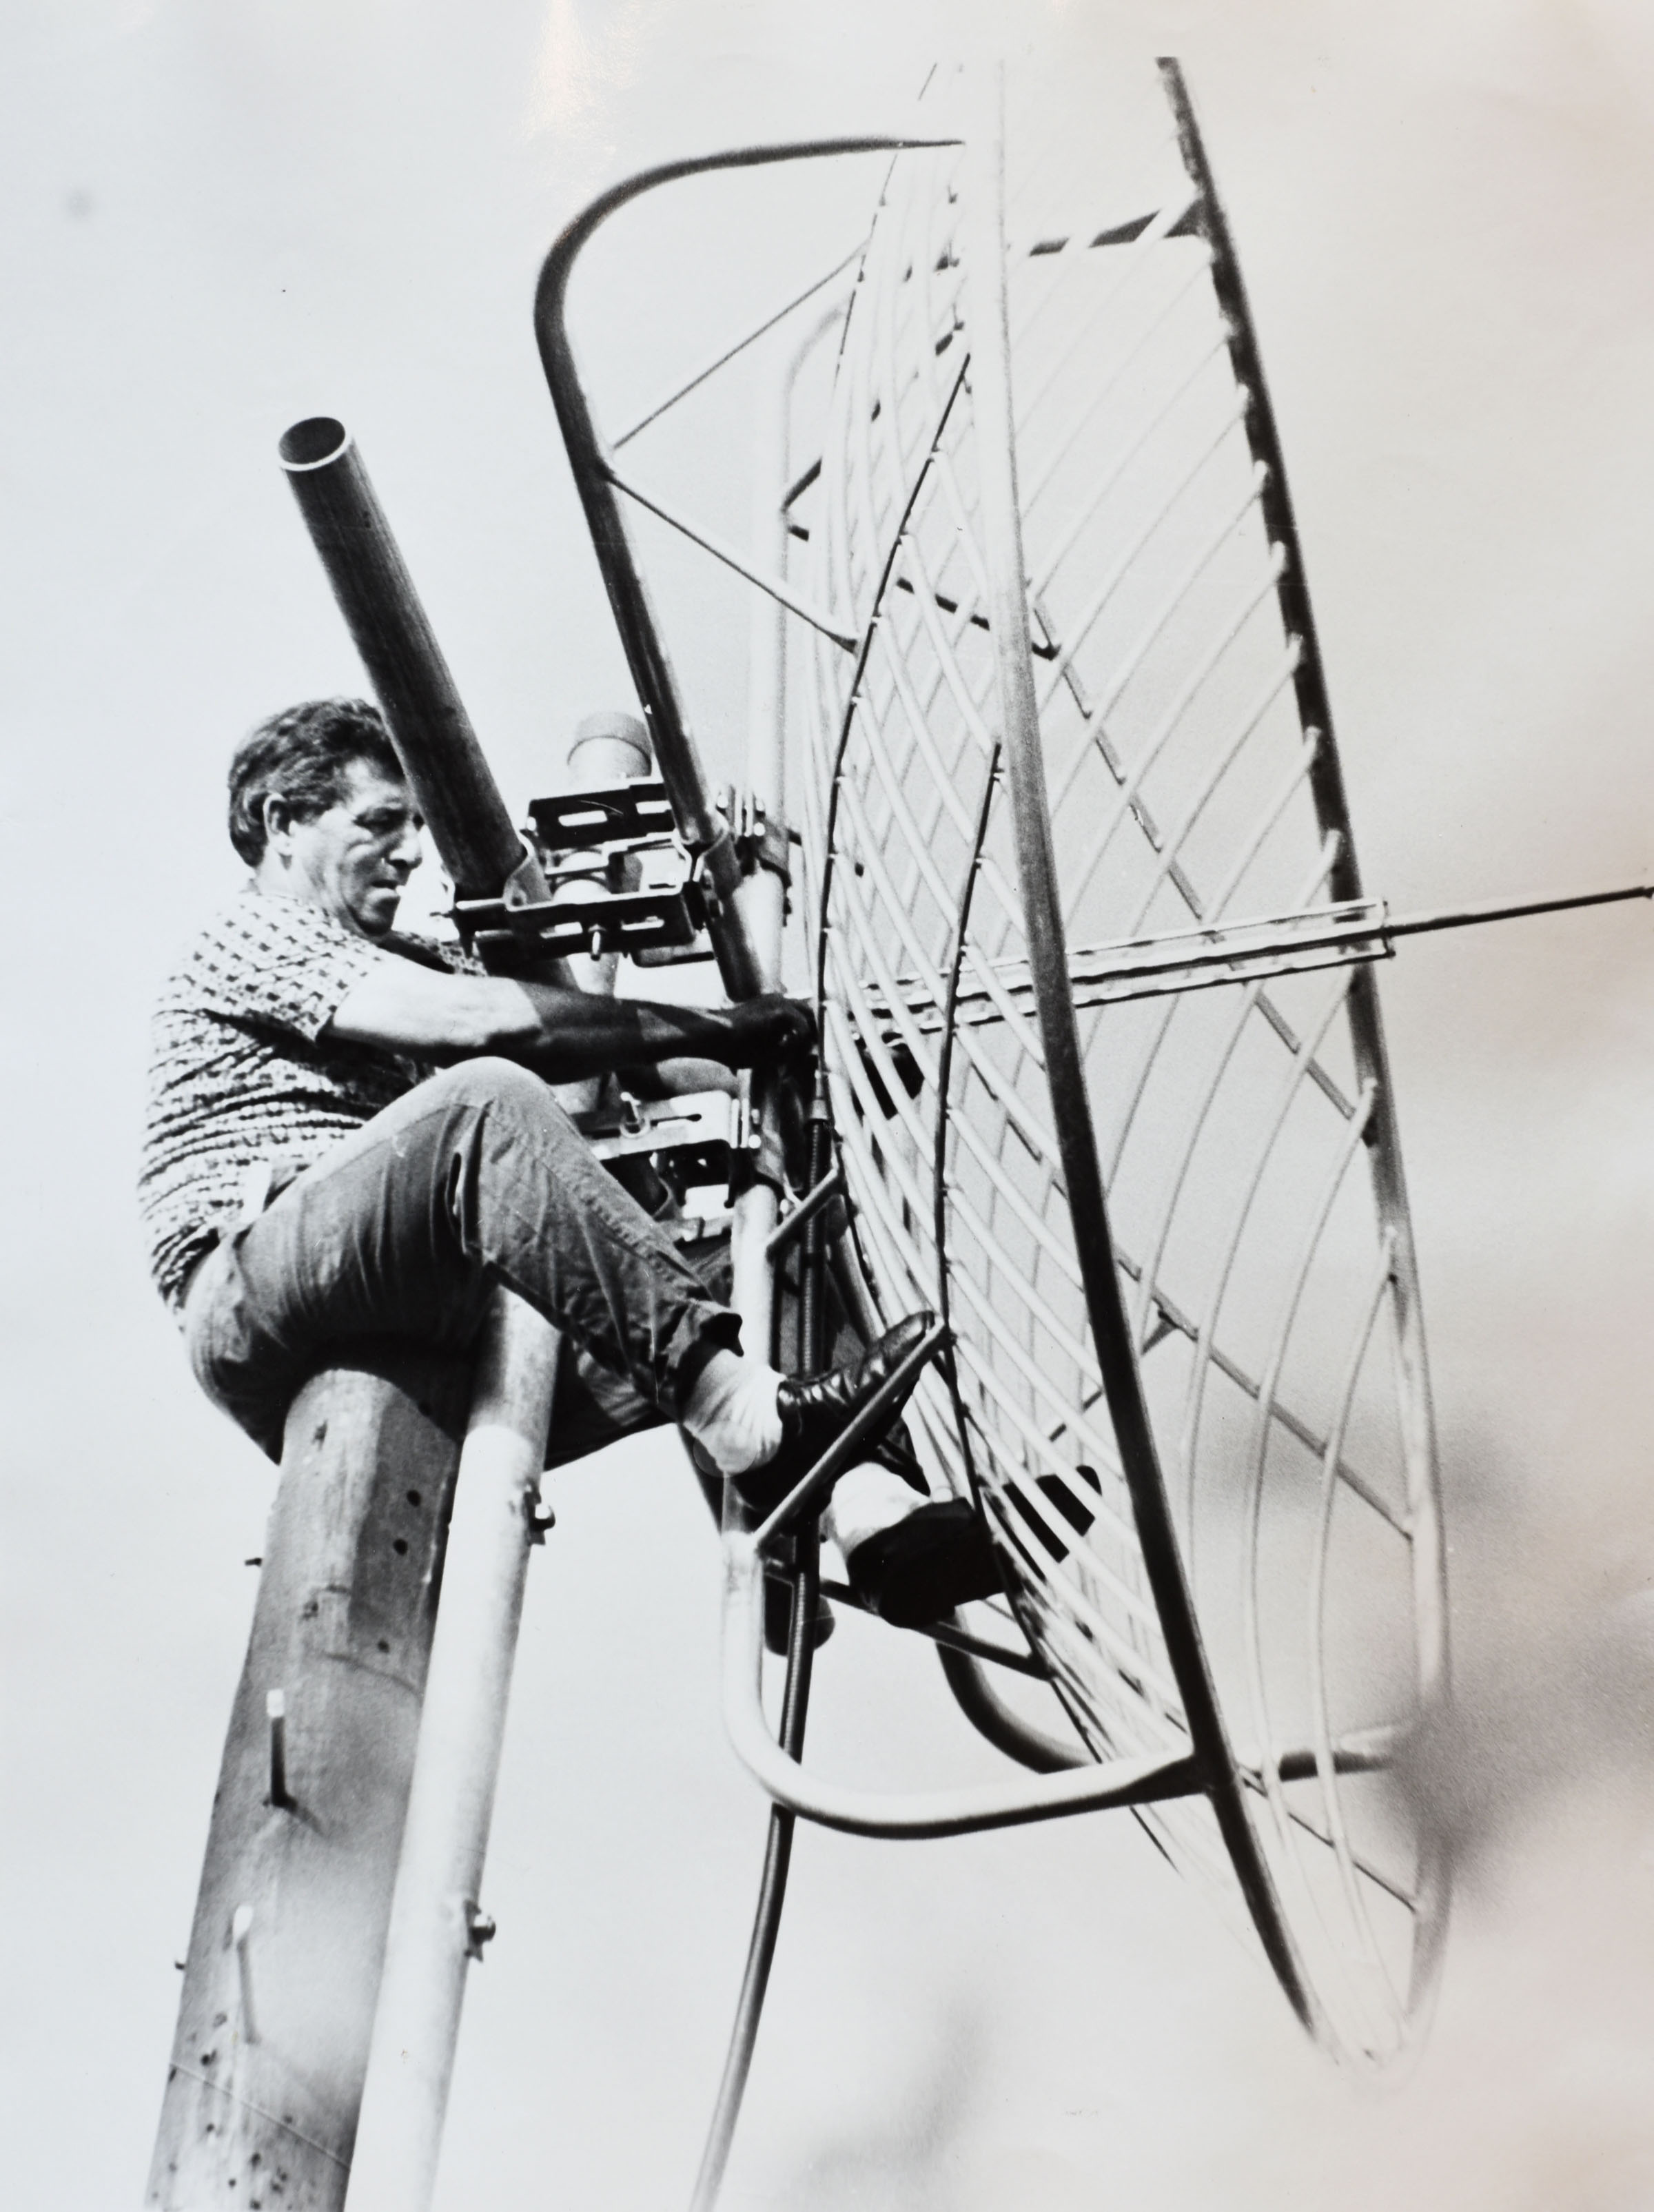 Dick Ellis could often be seen climbing the
antenna pole to install or repair equipment.